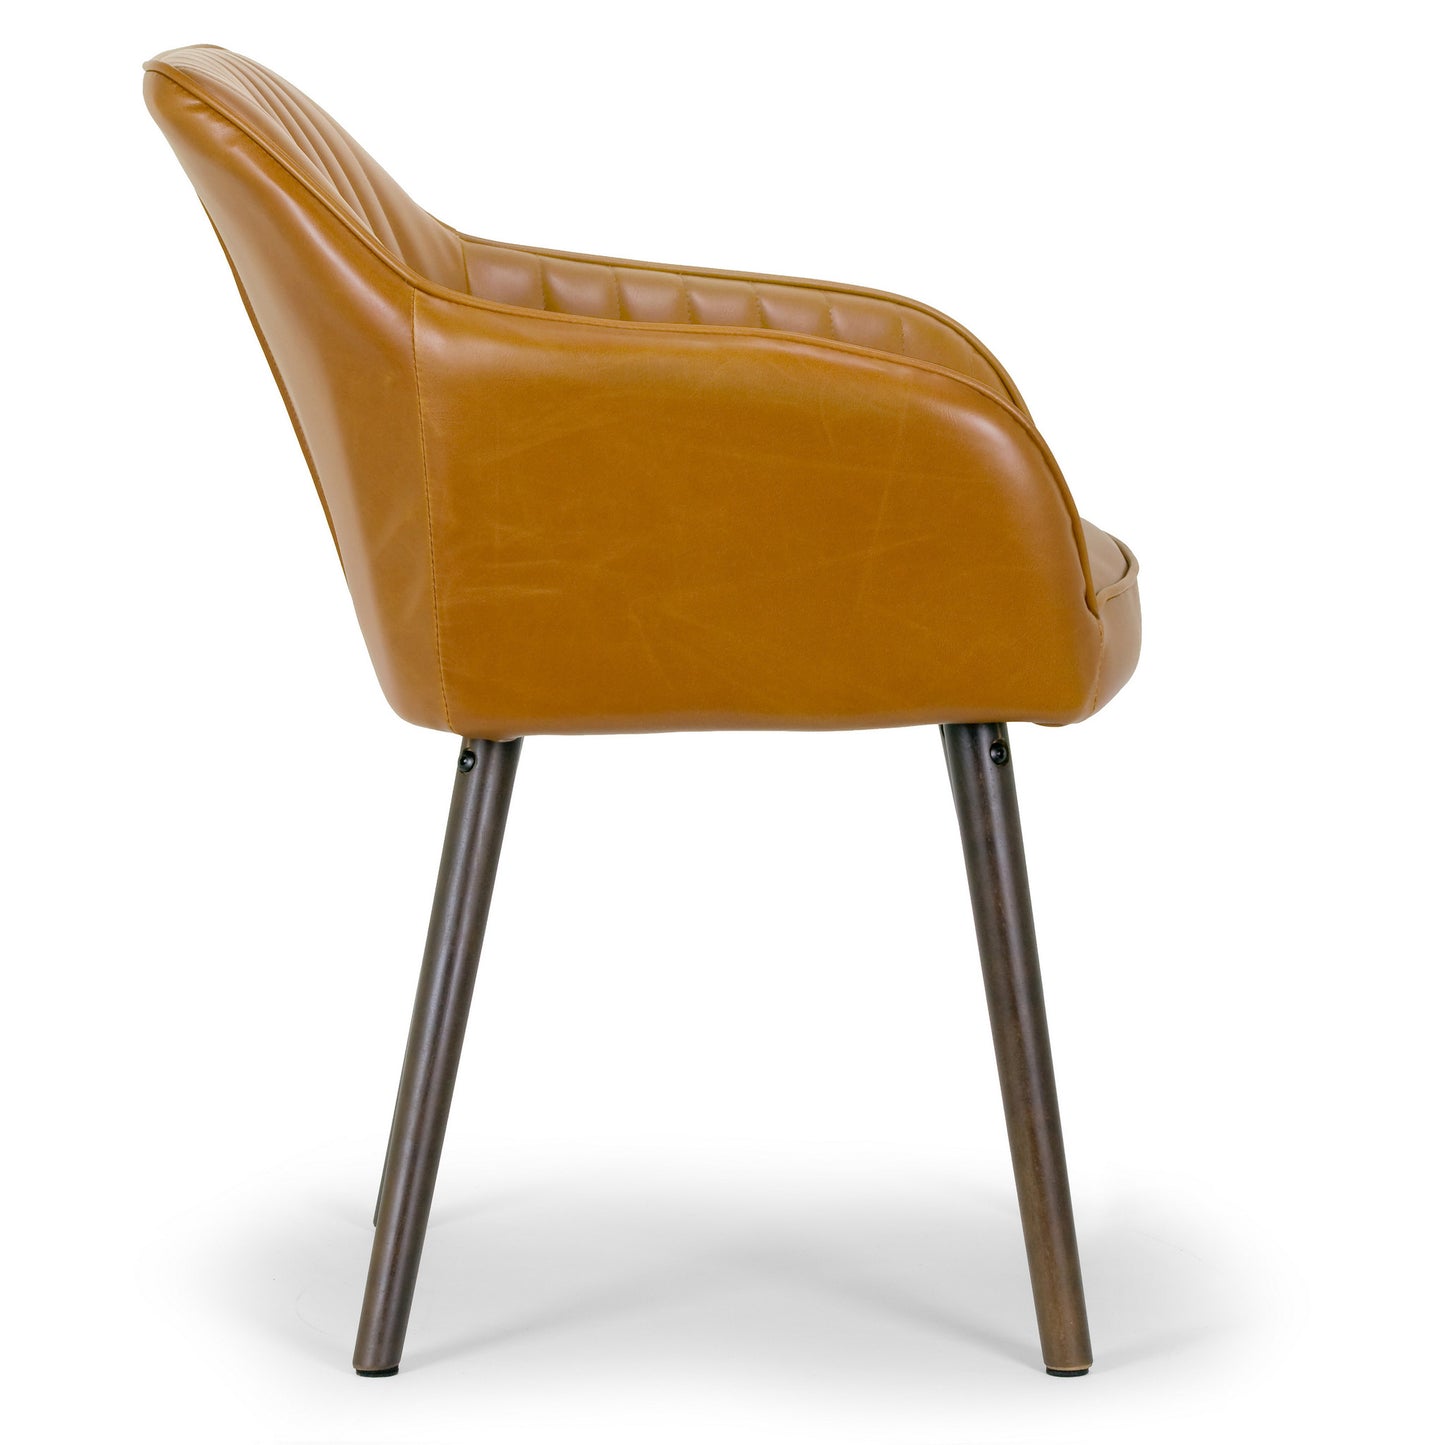 Set of 2 Alaura Arm Chair in Caramel Brown Faux Leather with Beech Legs